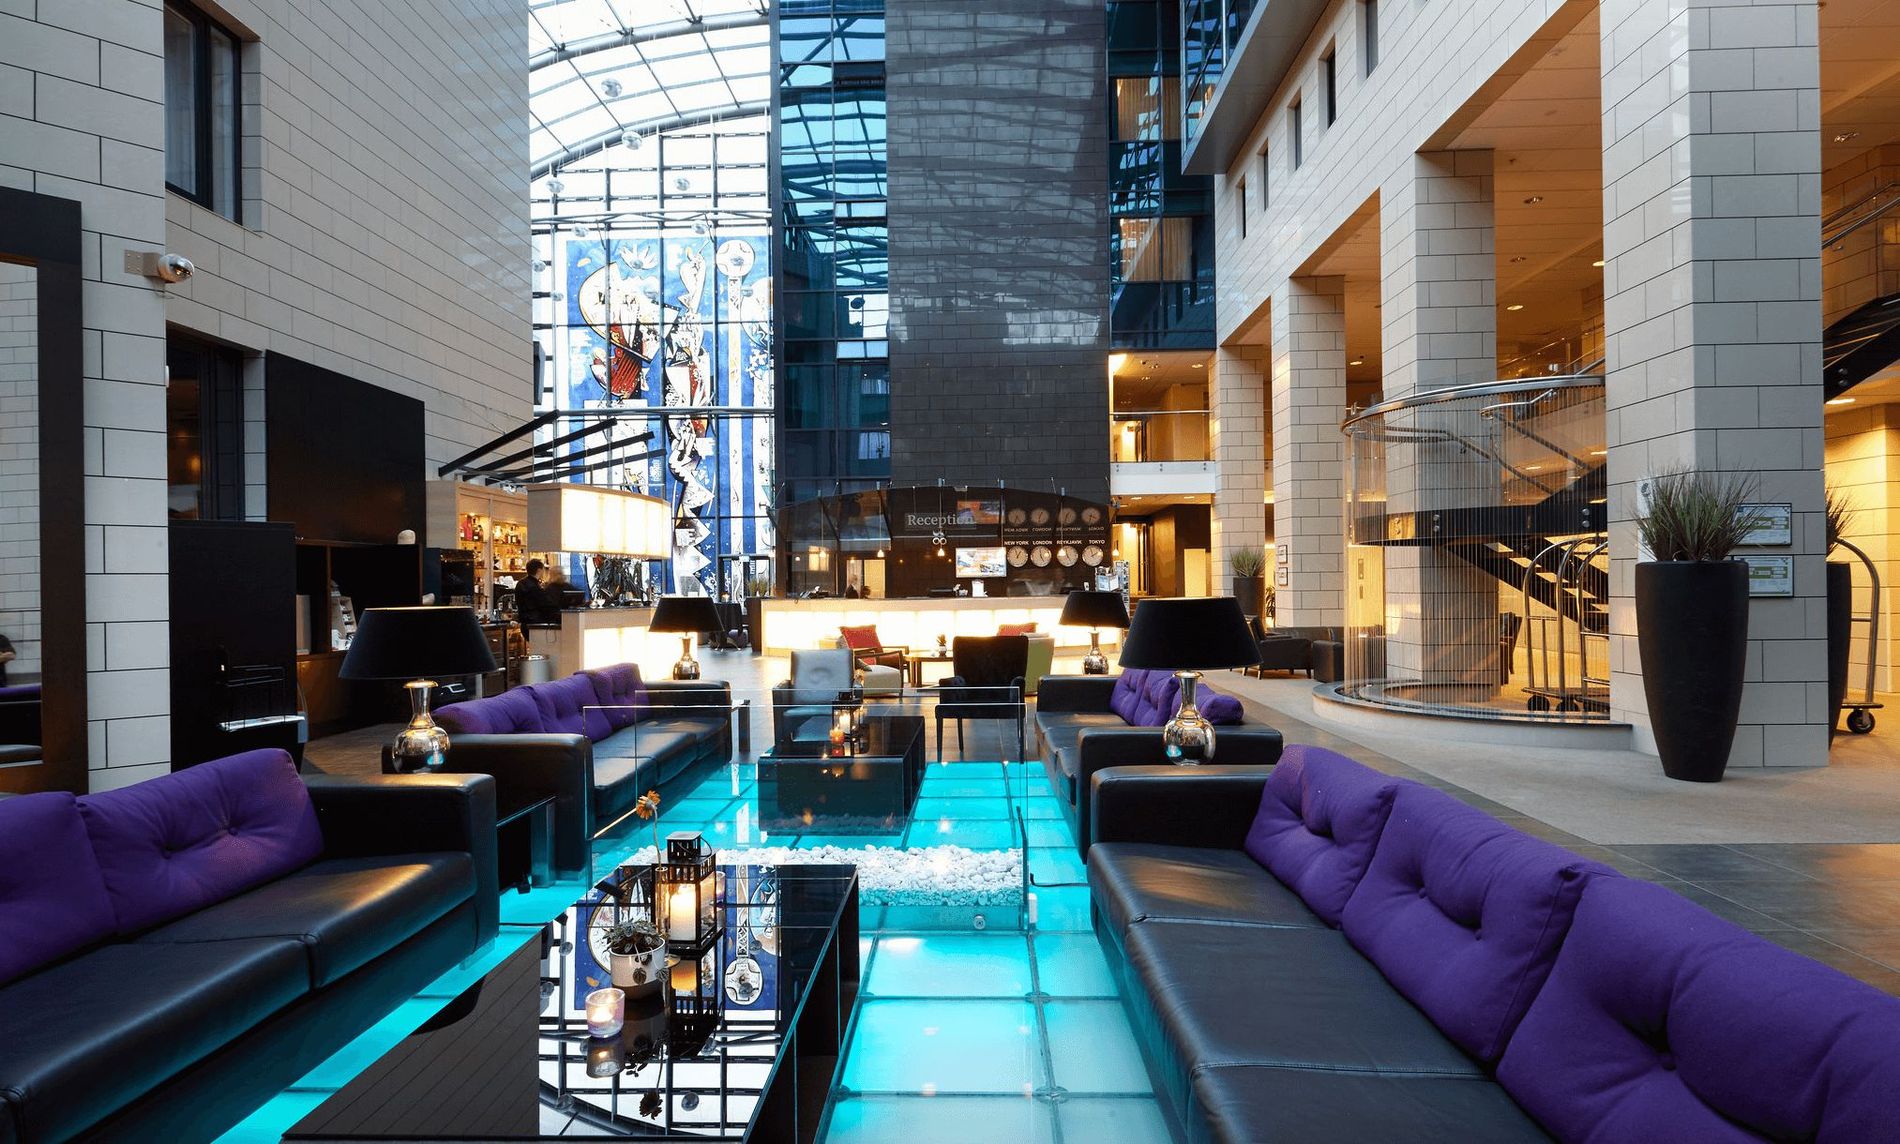 The lobby lounge at the Grand Hotel Reykjavik